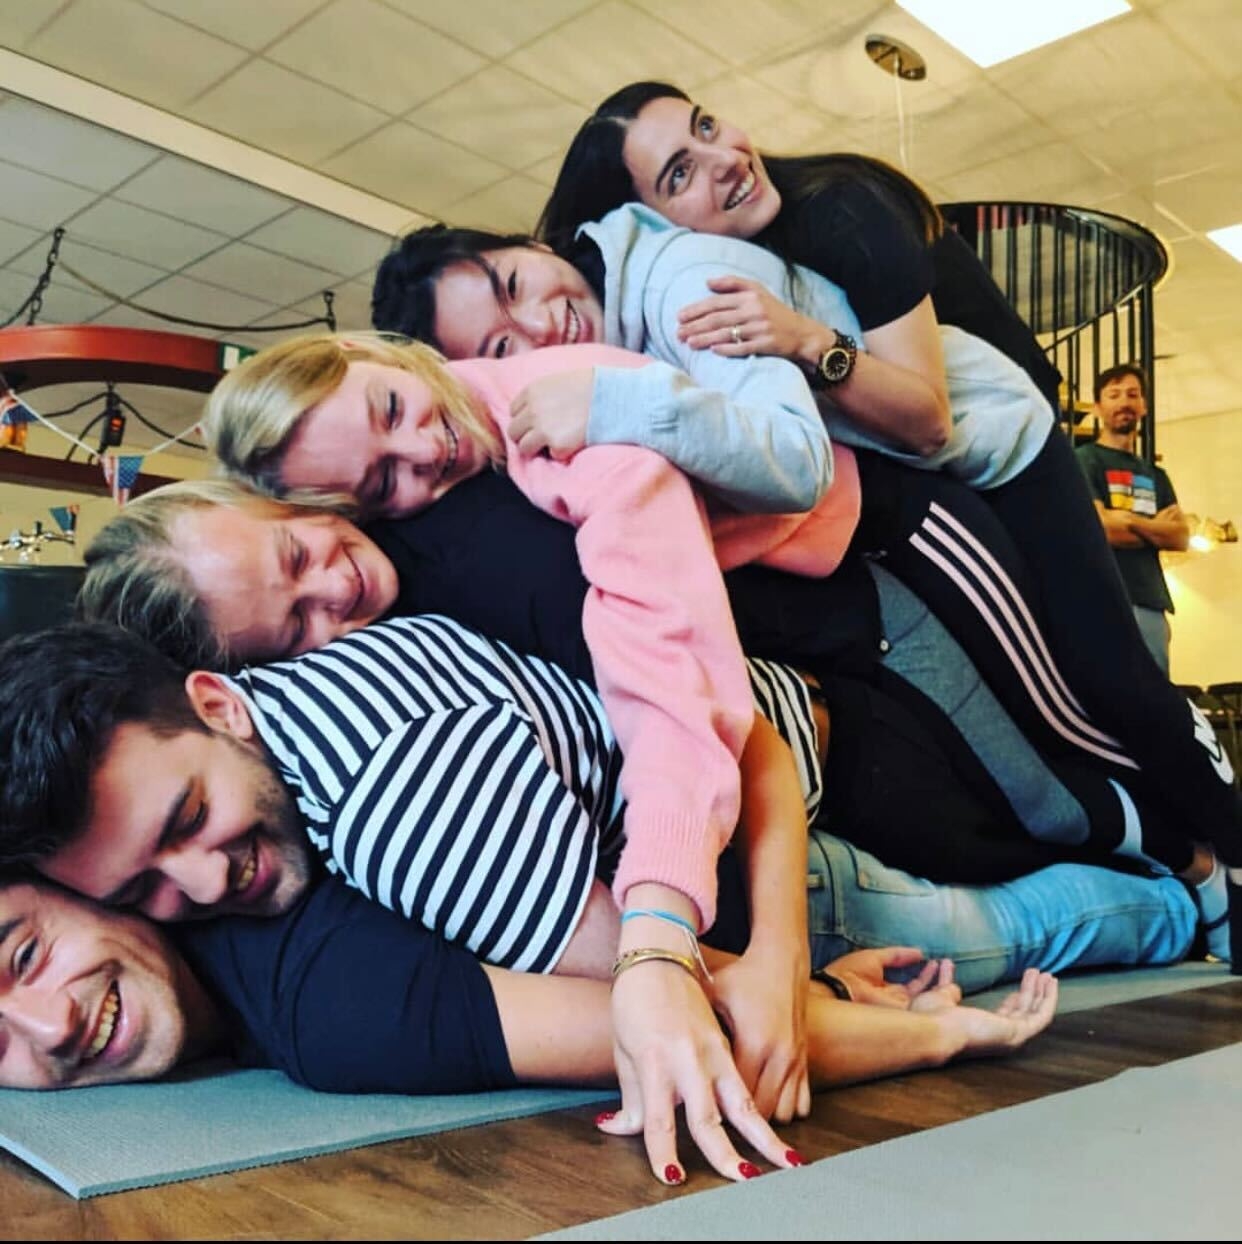 The Netherlands-based team during an in-office yoga session